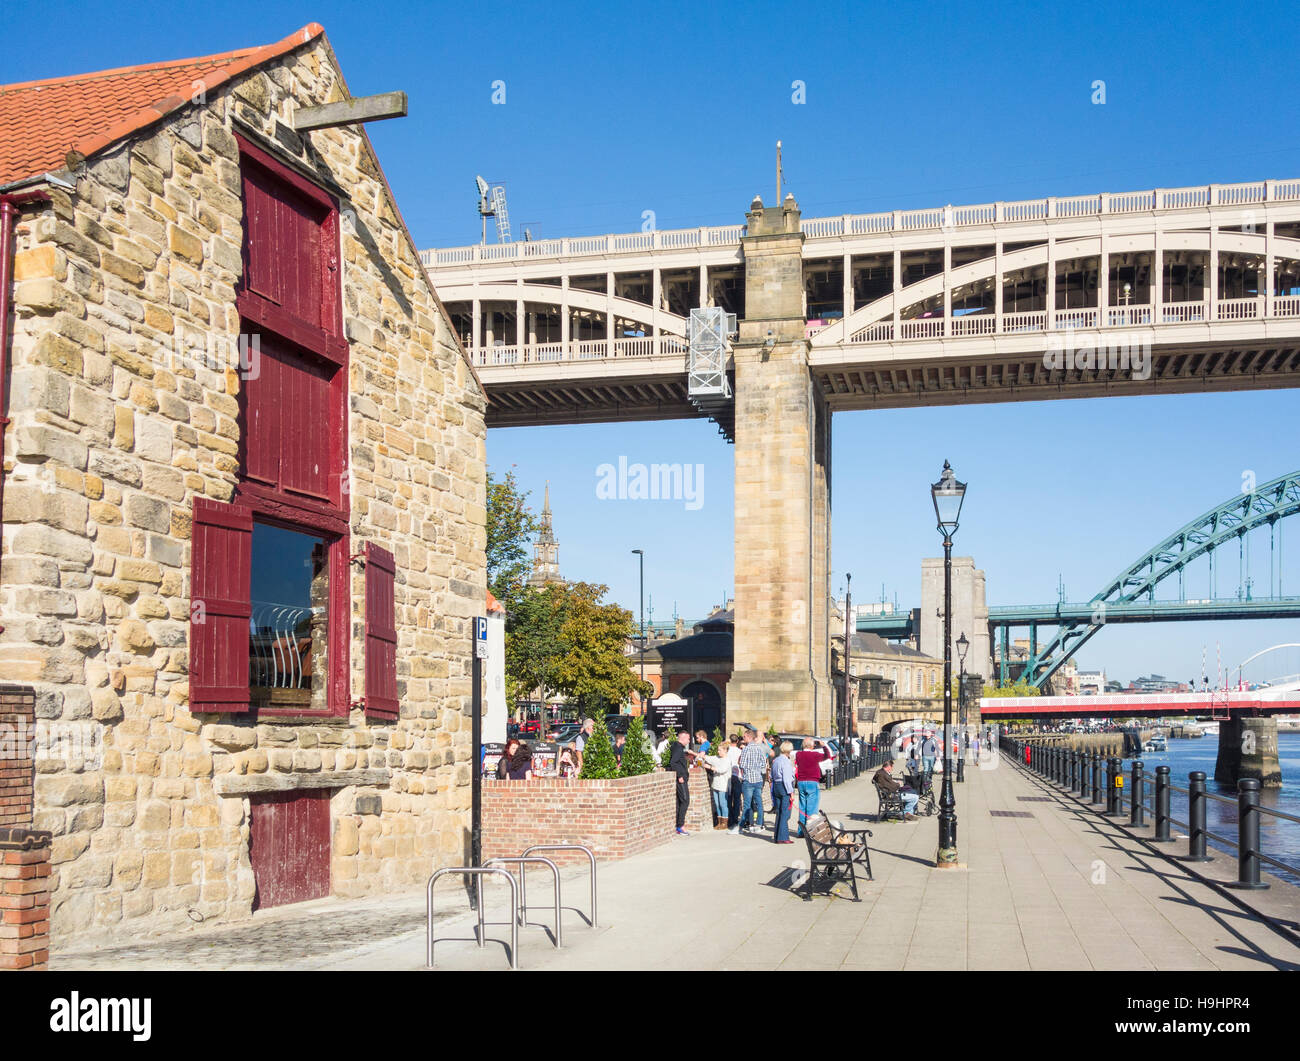 People outside The Quayside pub (a J D Wetherspoon pub) on the Quayside at Newcastle upon Tyne, England Stock Photo